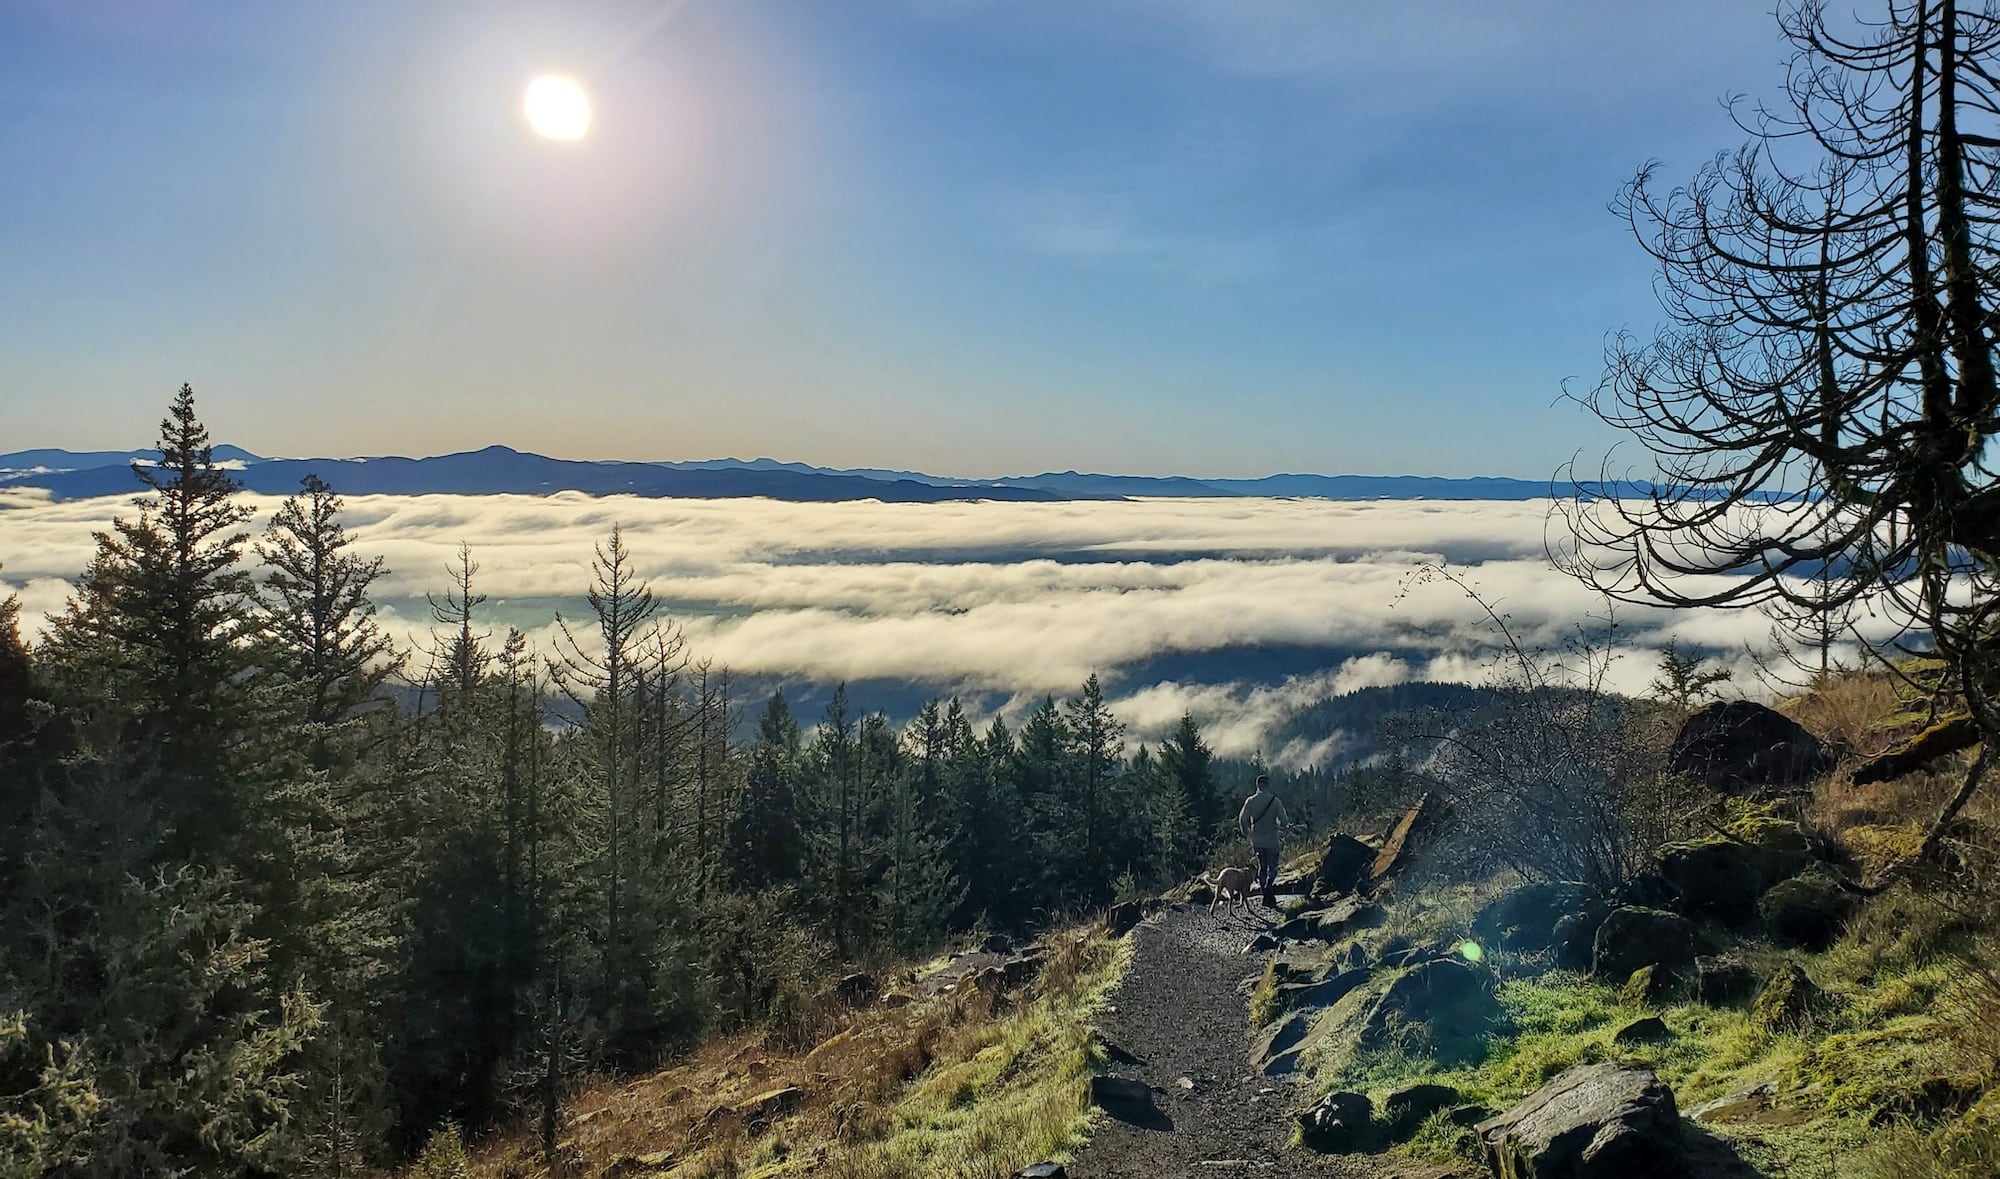 Hiking above the clouds at Spencer Butte